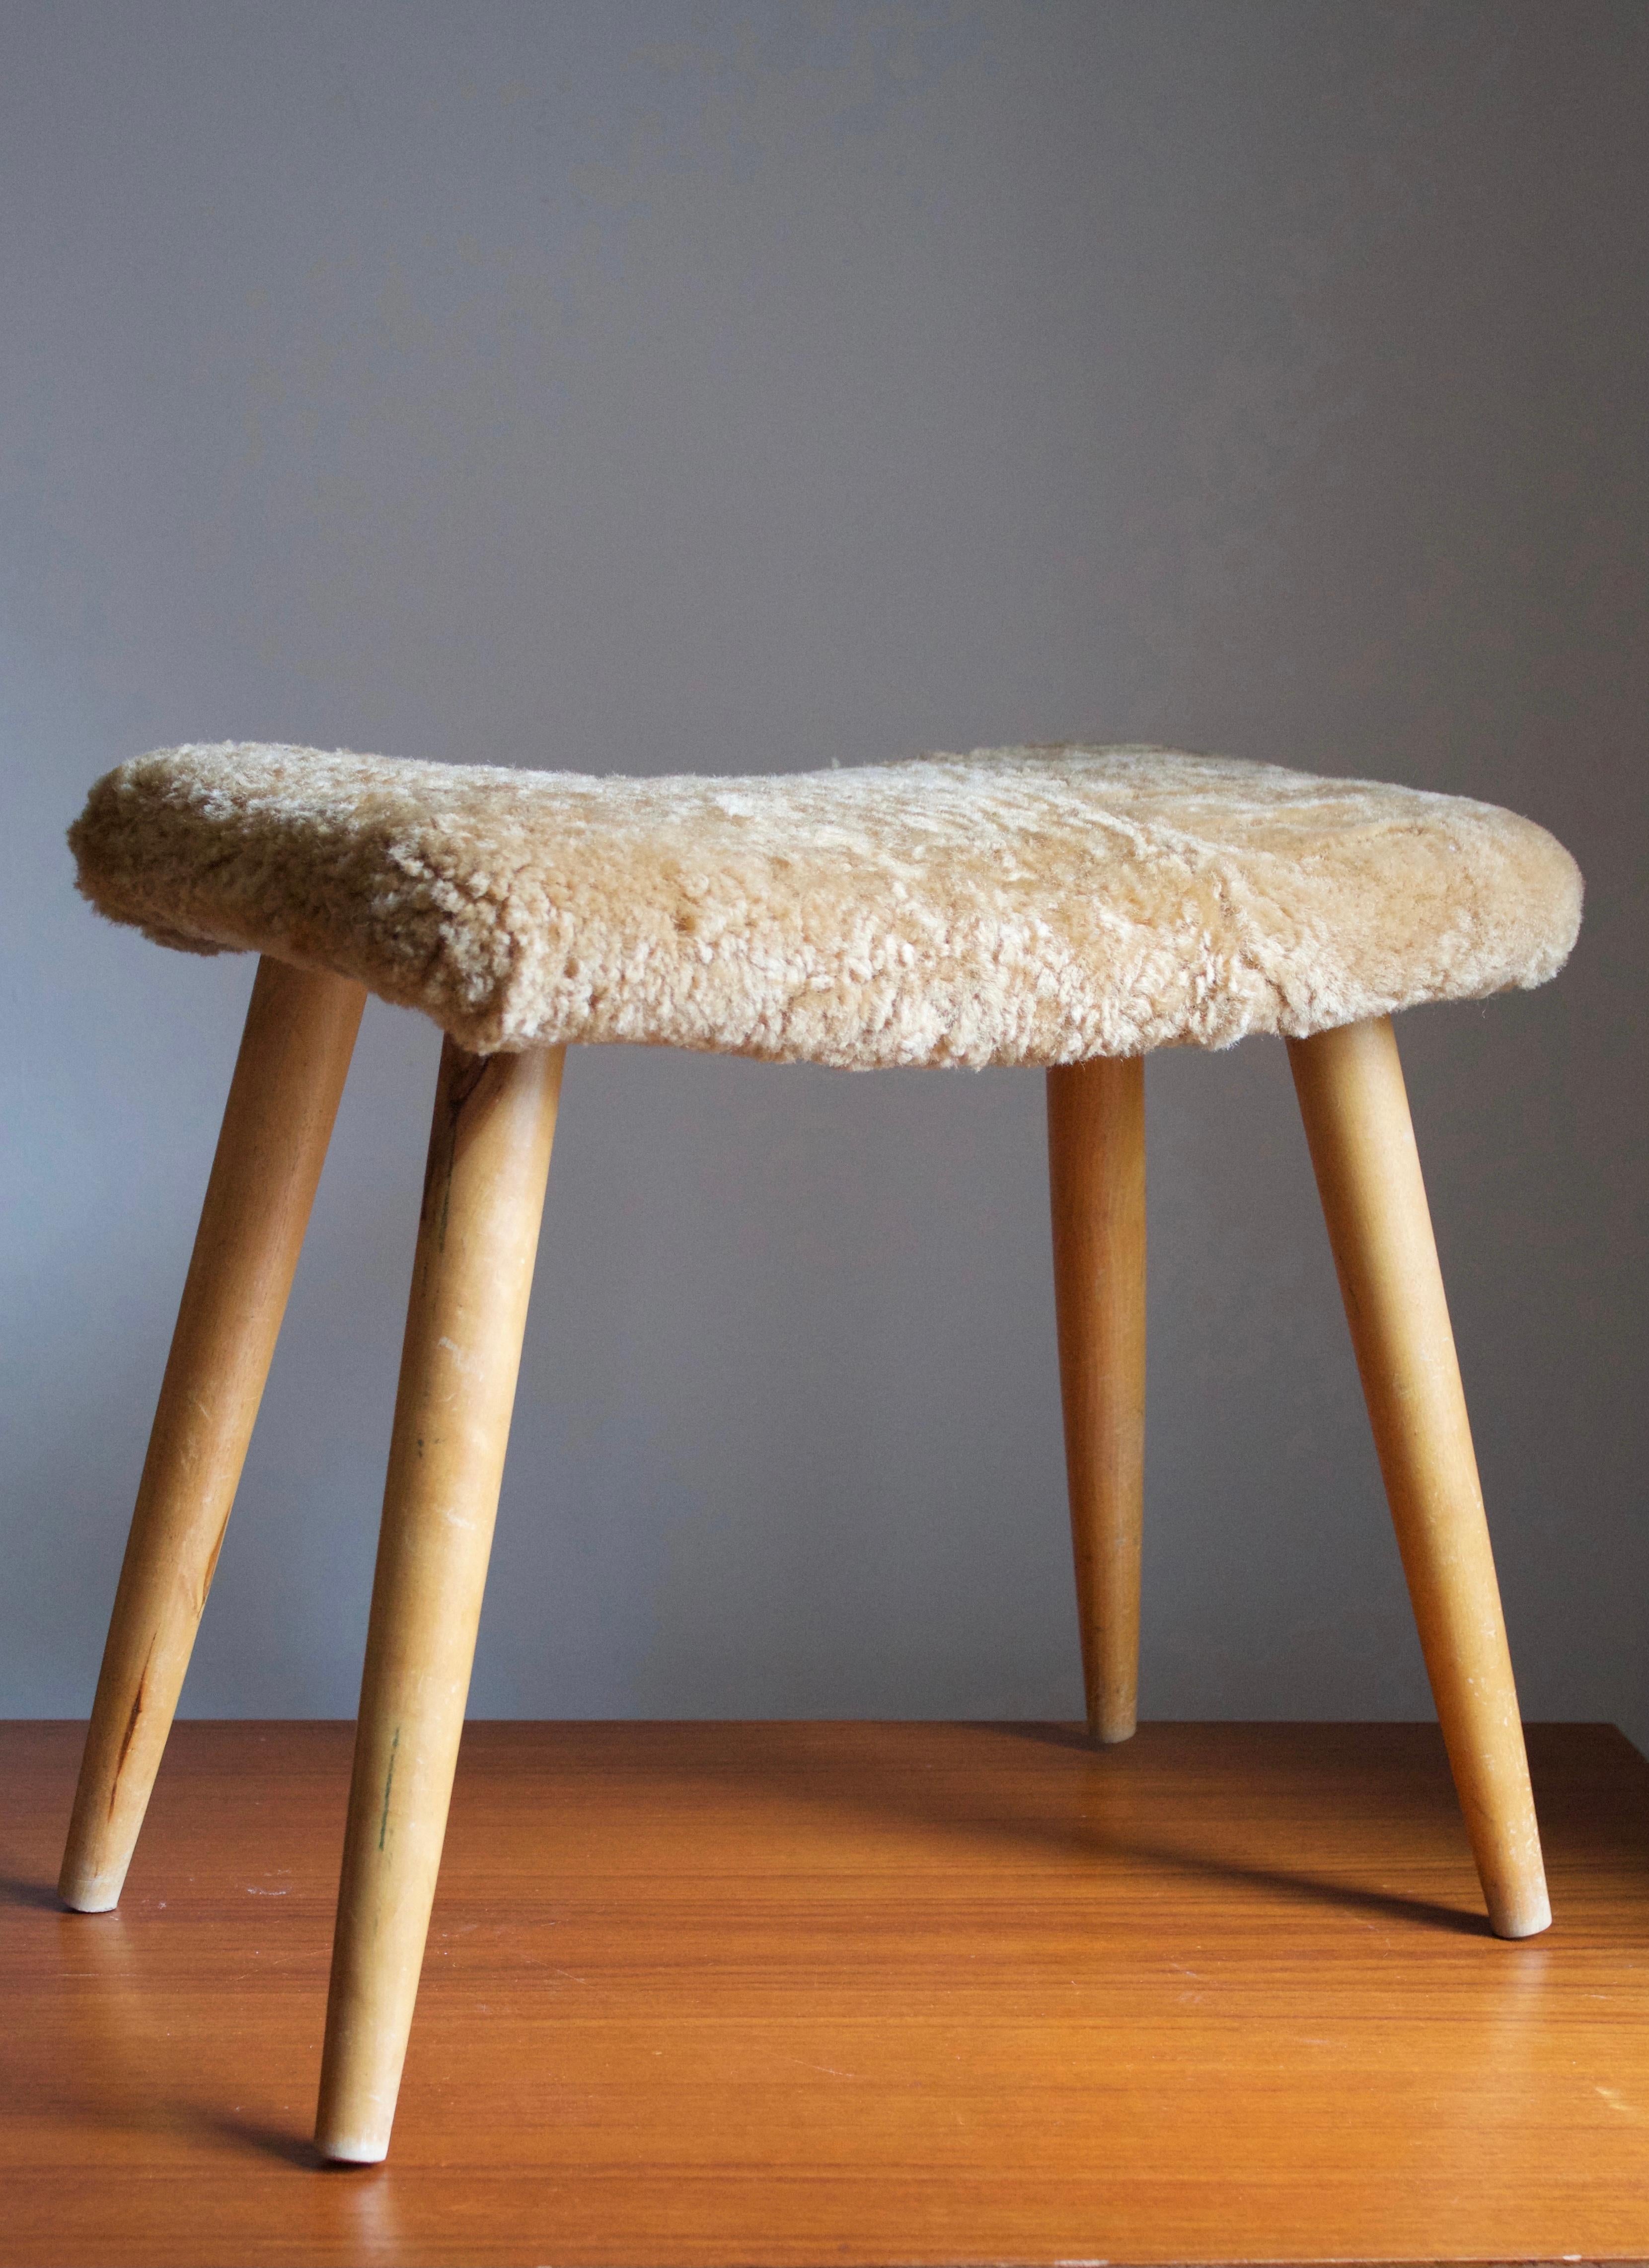 A stool in stained oak, overstuffed seat reupholstered in brand new sheepskin upholstery. Produced in Sweden, 1950s.

Other designers of the period include Finn Juhl, Hans Wegner, Isamu Noguchi, Charlotte Perriand, and.